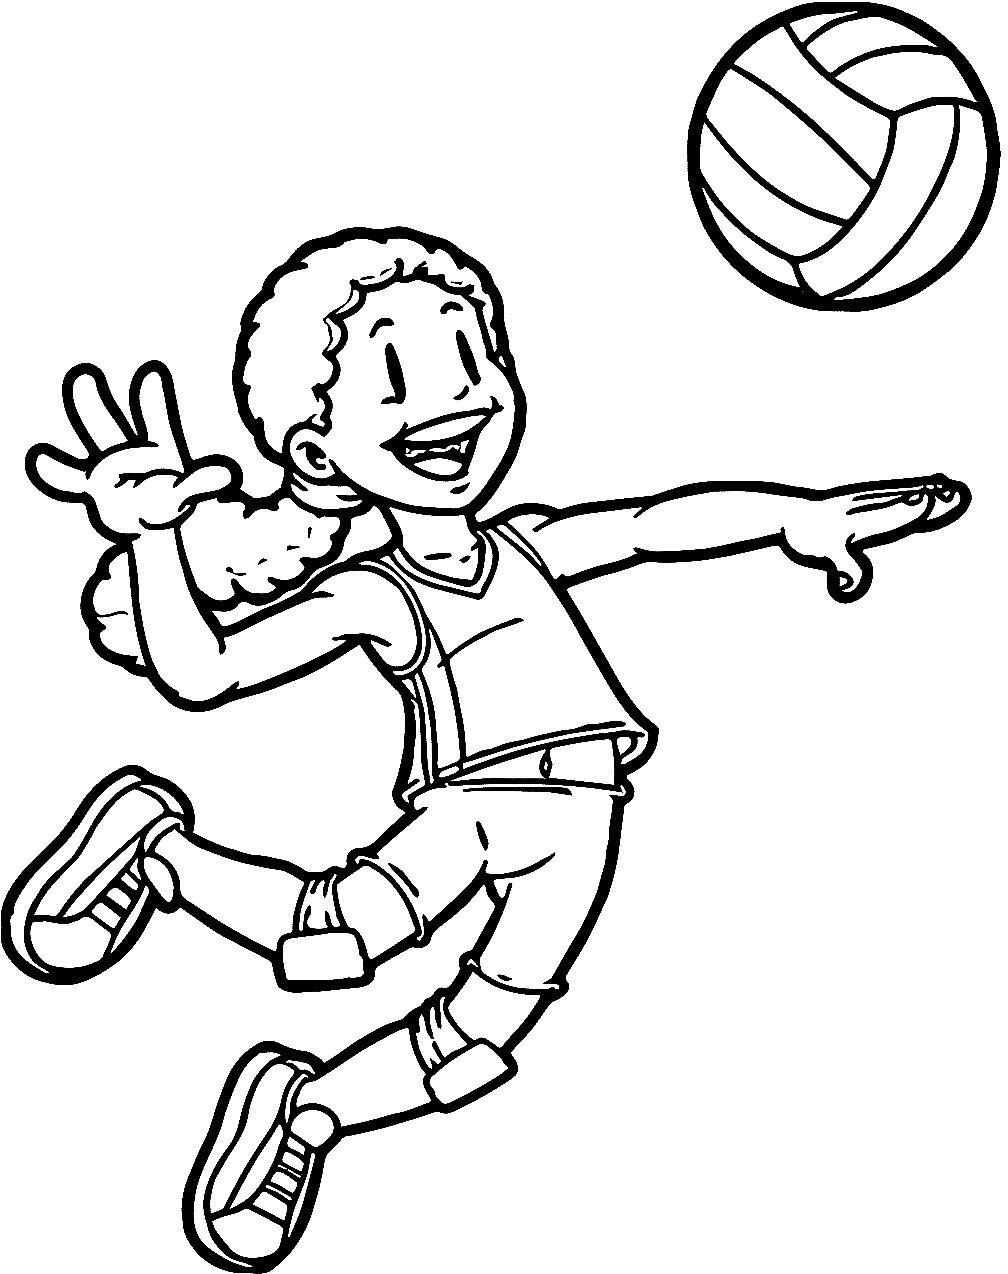 Girl Volleyball Player Coloring Page